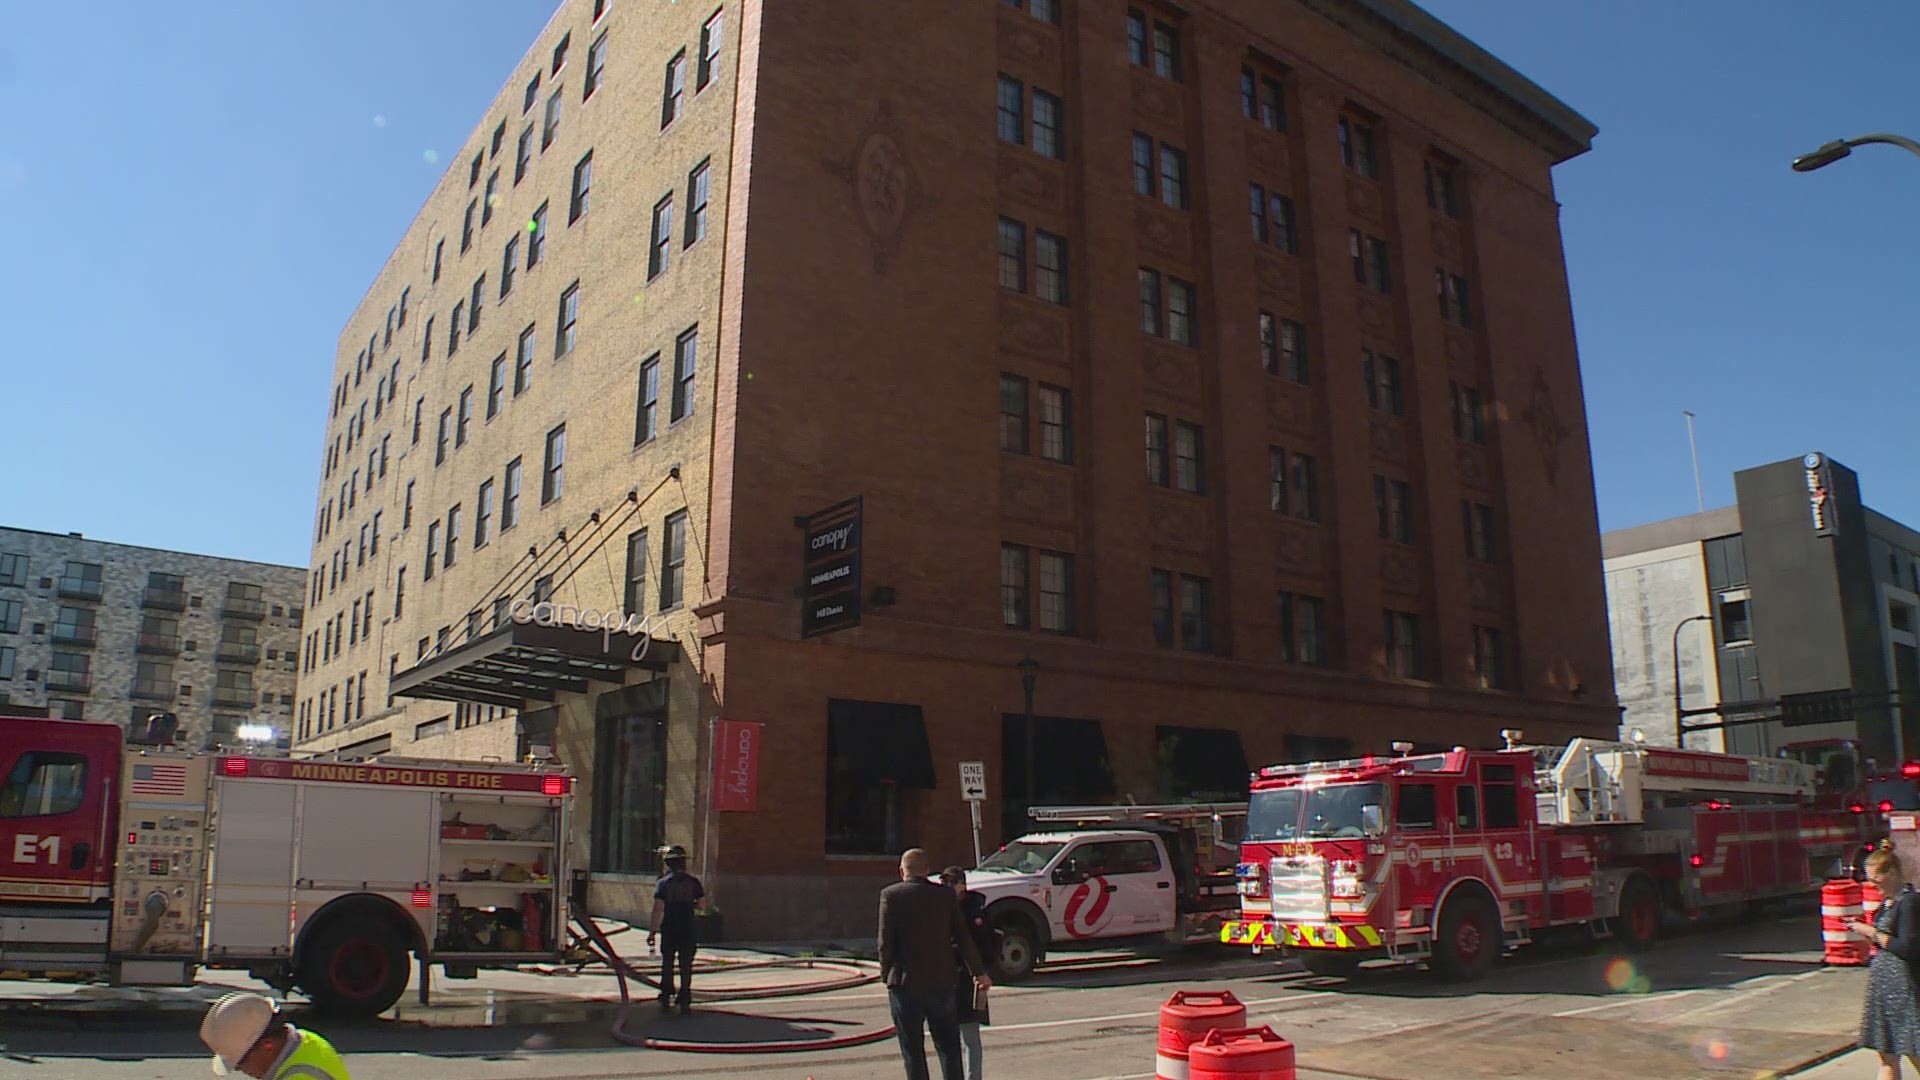 The Canopy Hotel in Minneapolis was evacuated Thursday after it started on fire.